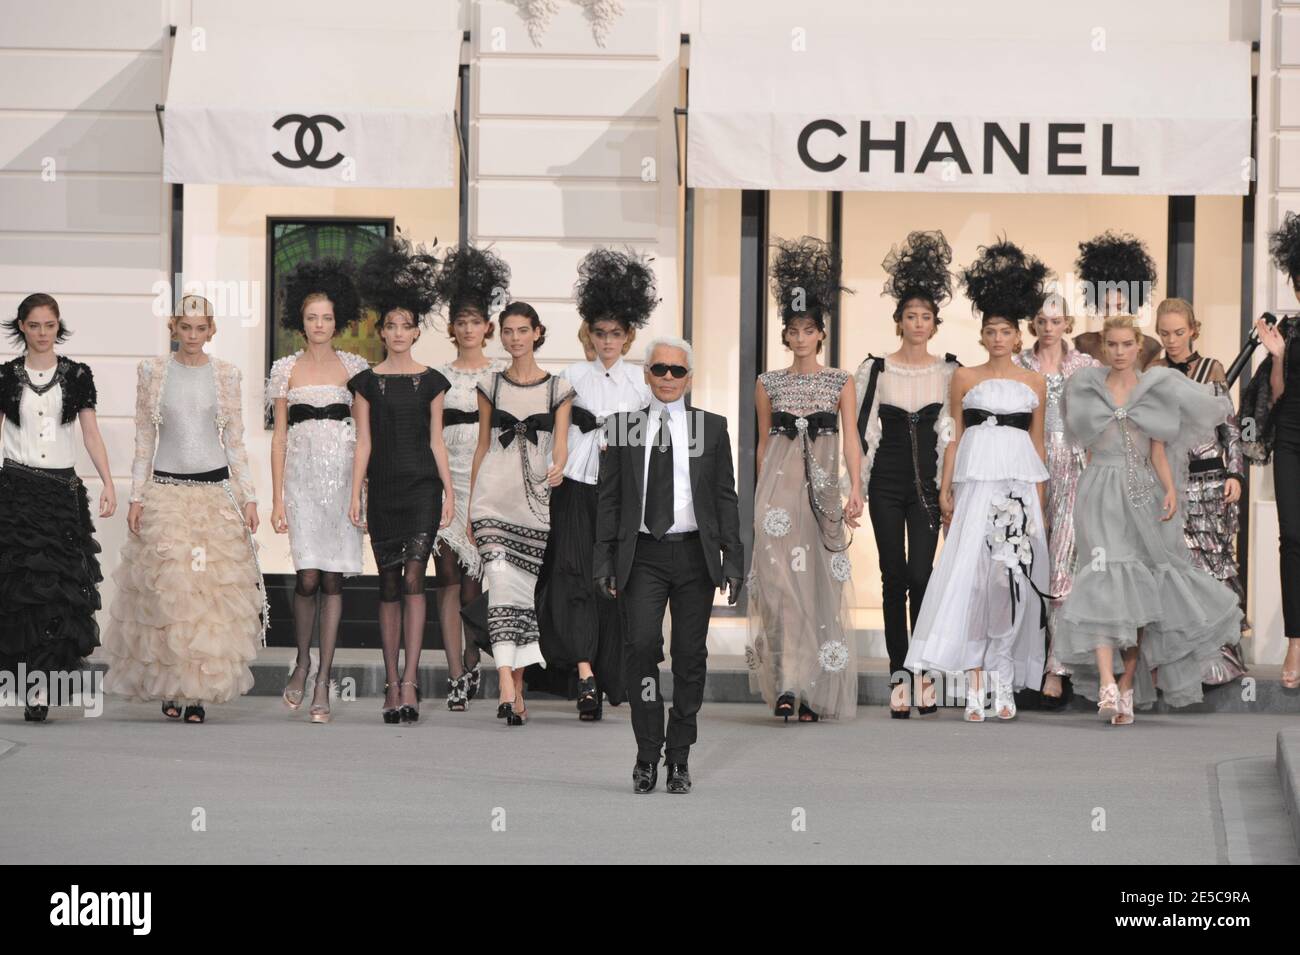 Karl Lagerfeld on the catwalk during the Chanel house Spring-Summer 2009  Ready-to-Wear collection show in Paris, France on October 3, 2008. Photo by  Orban Thierry/ABACAPRESS.COM Stock Photo - Alamy